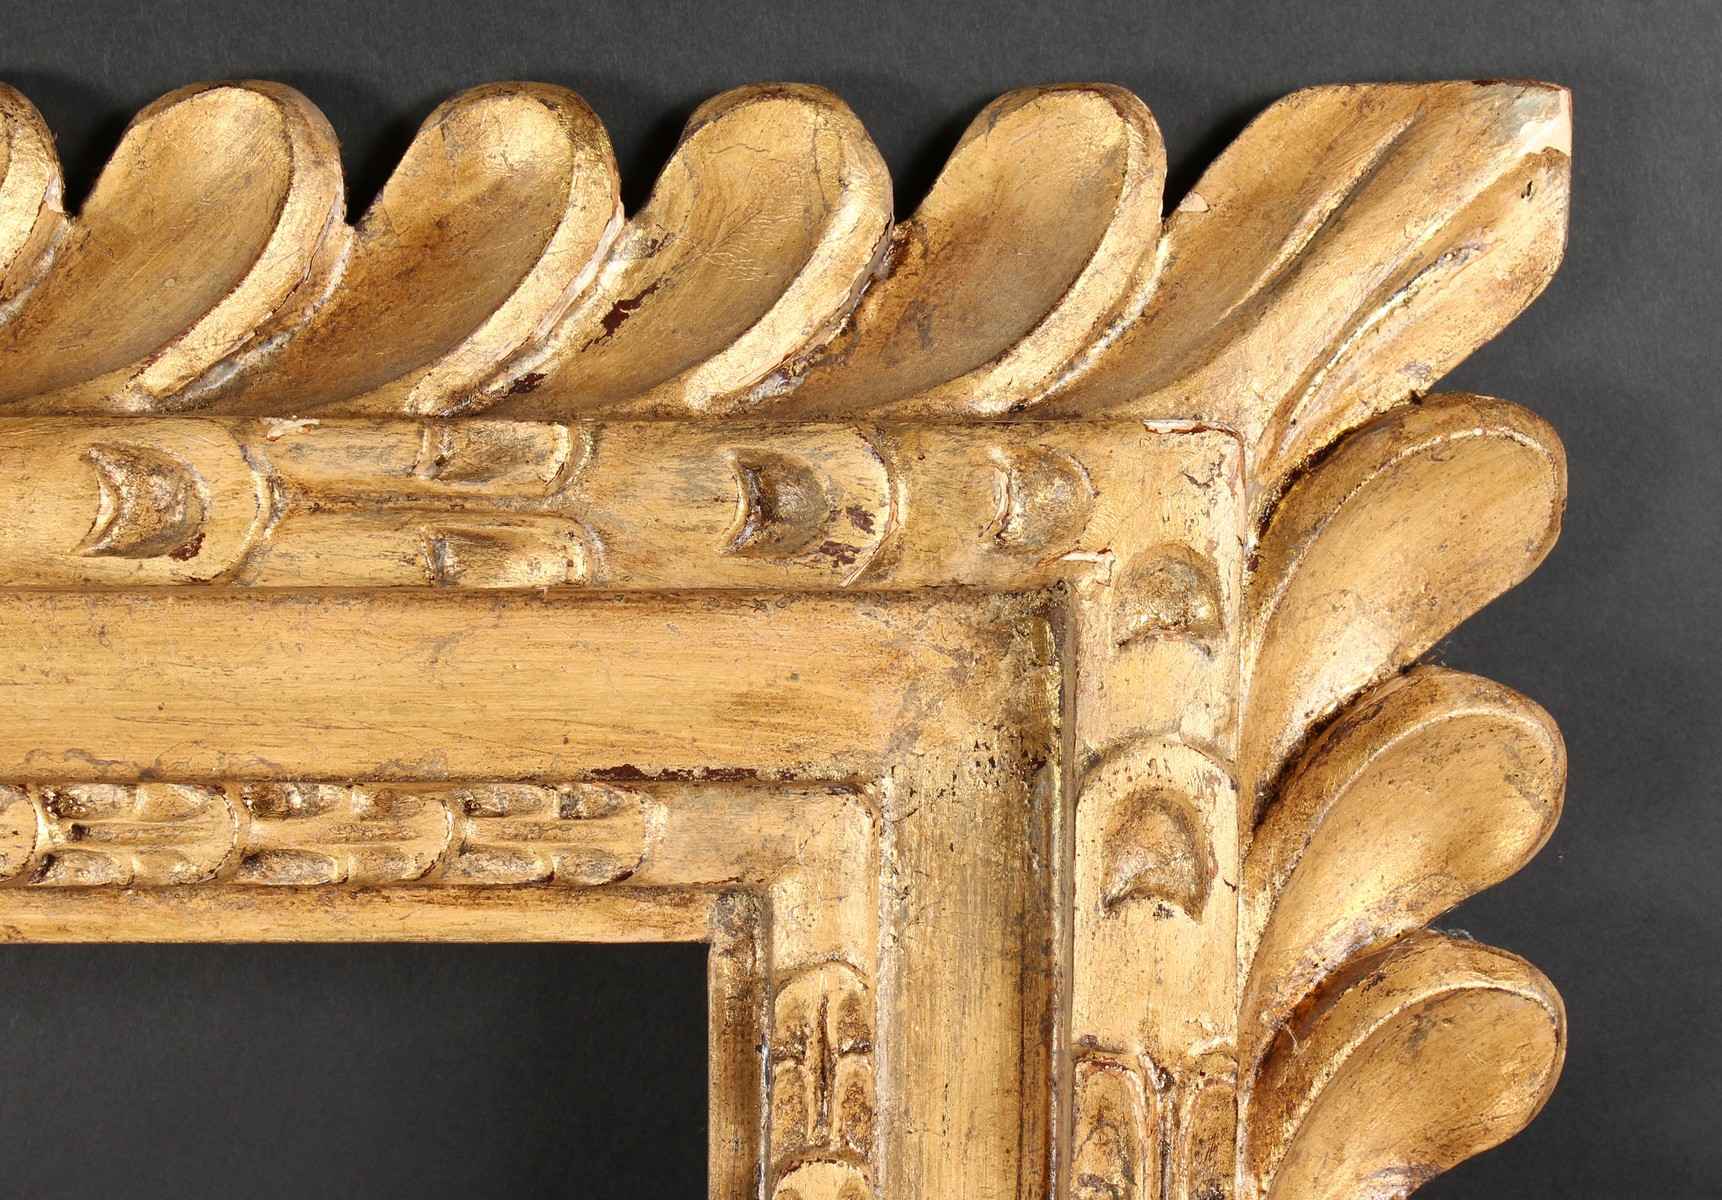 An Early 20th Century Carved Wood Frame with a Heavy Knulled Edge. 30" x 22.5" - 76.25cm x 57cm. (